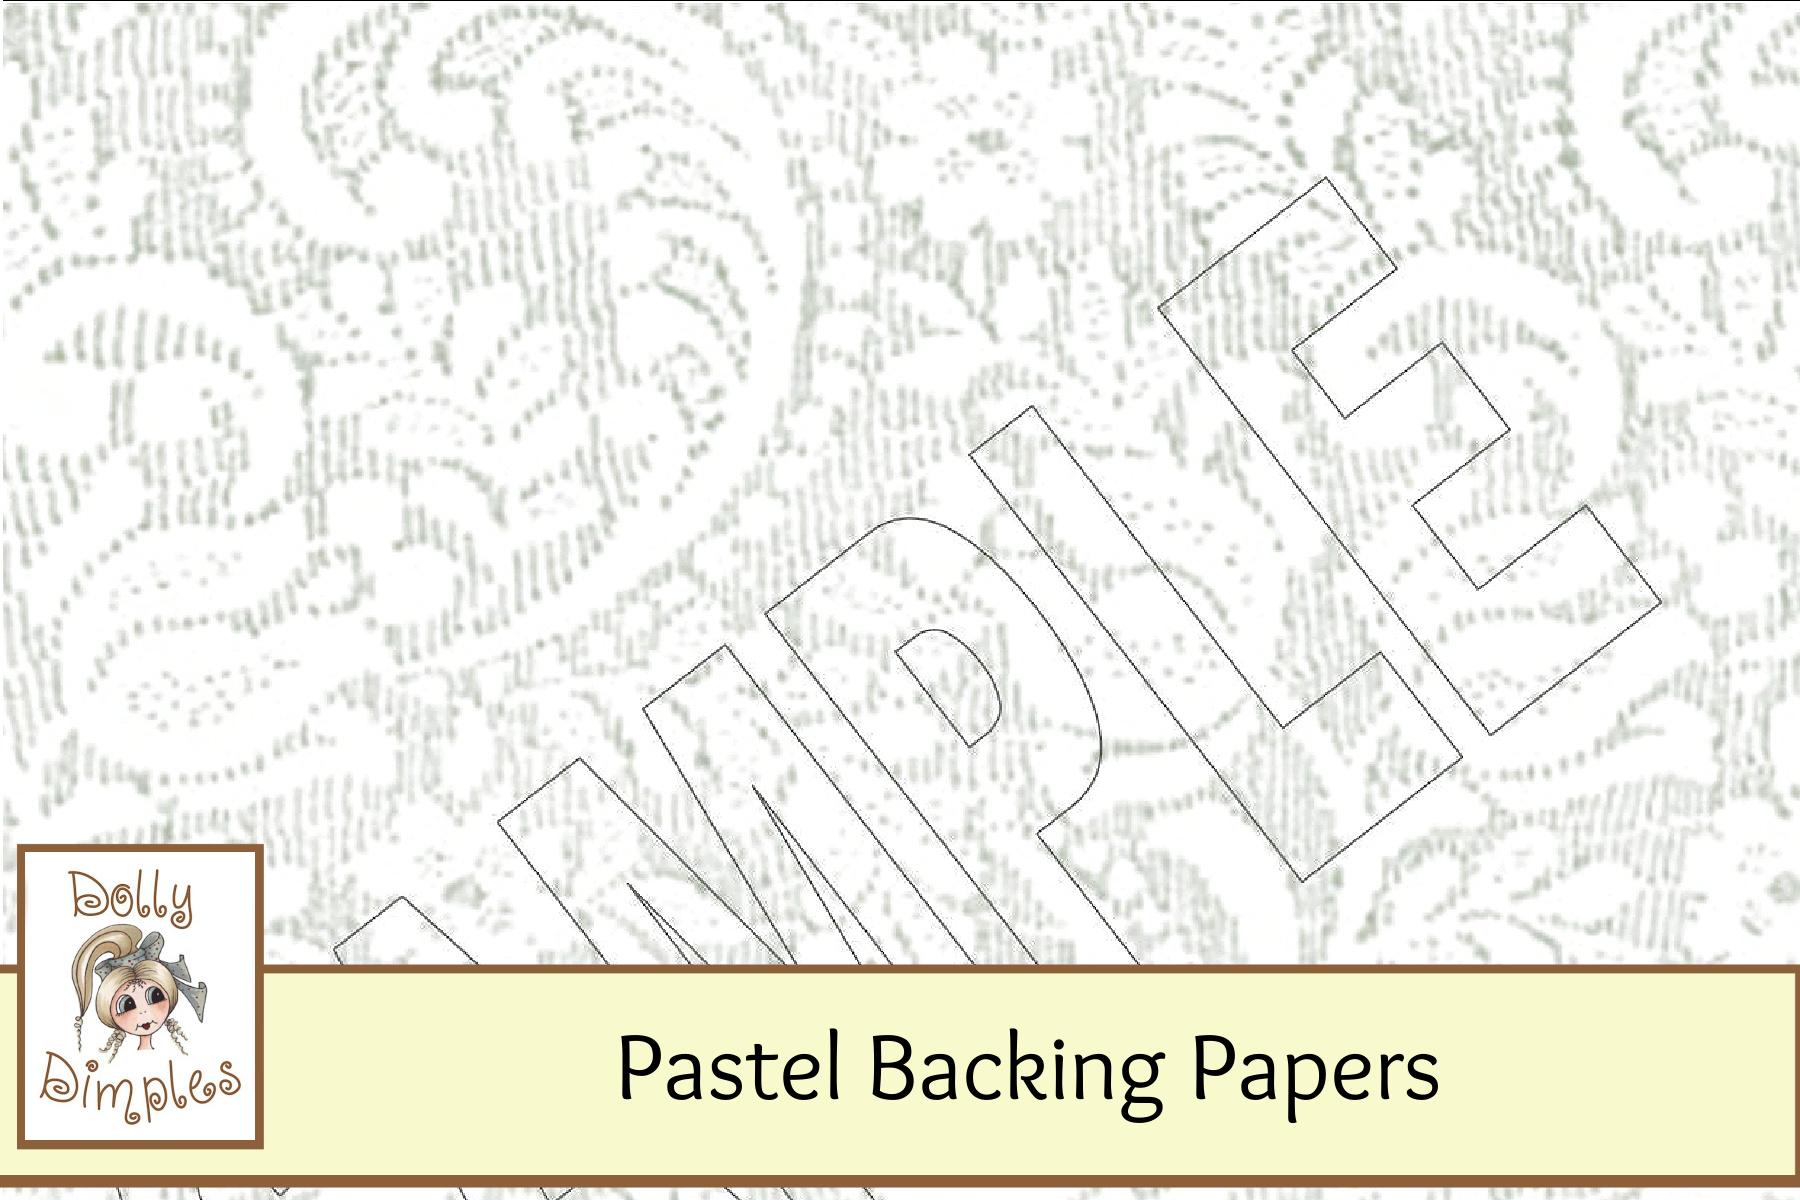 Pastel Backing Papers